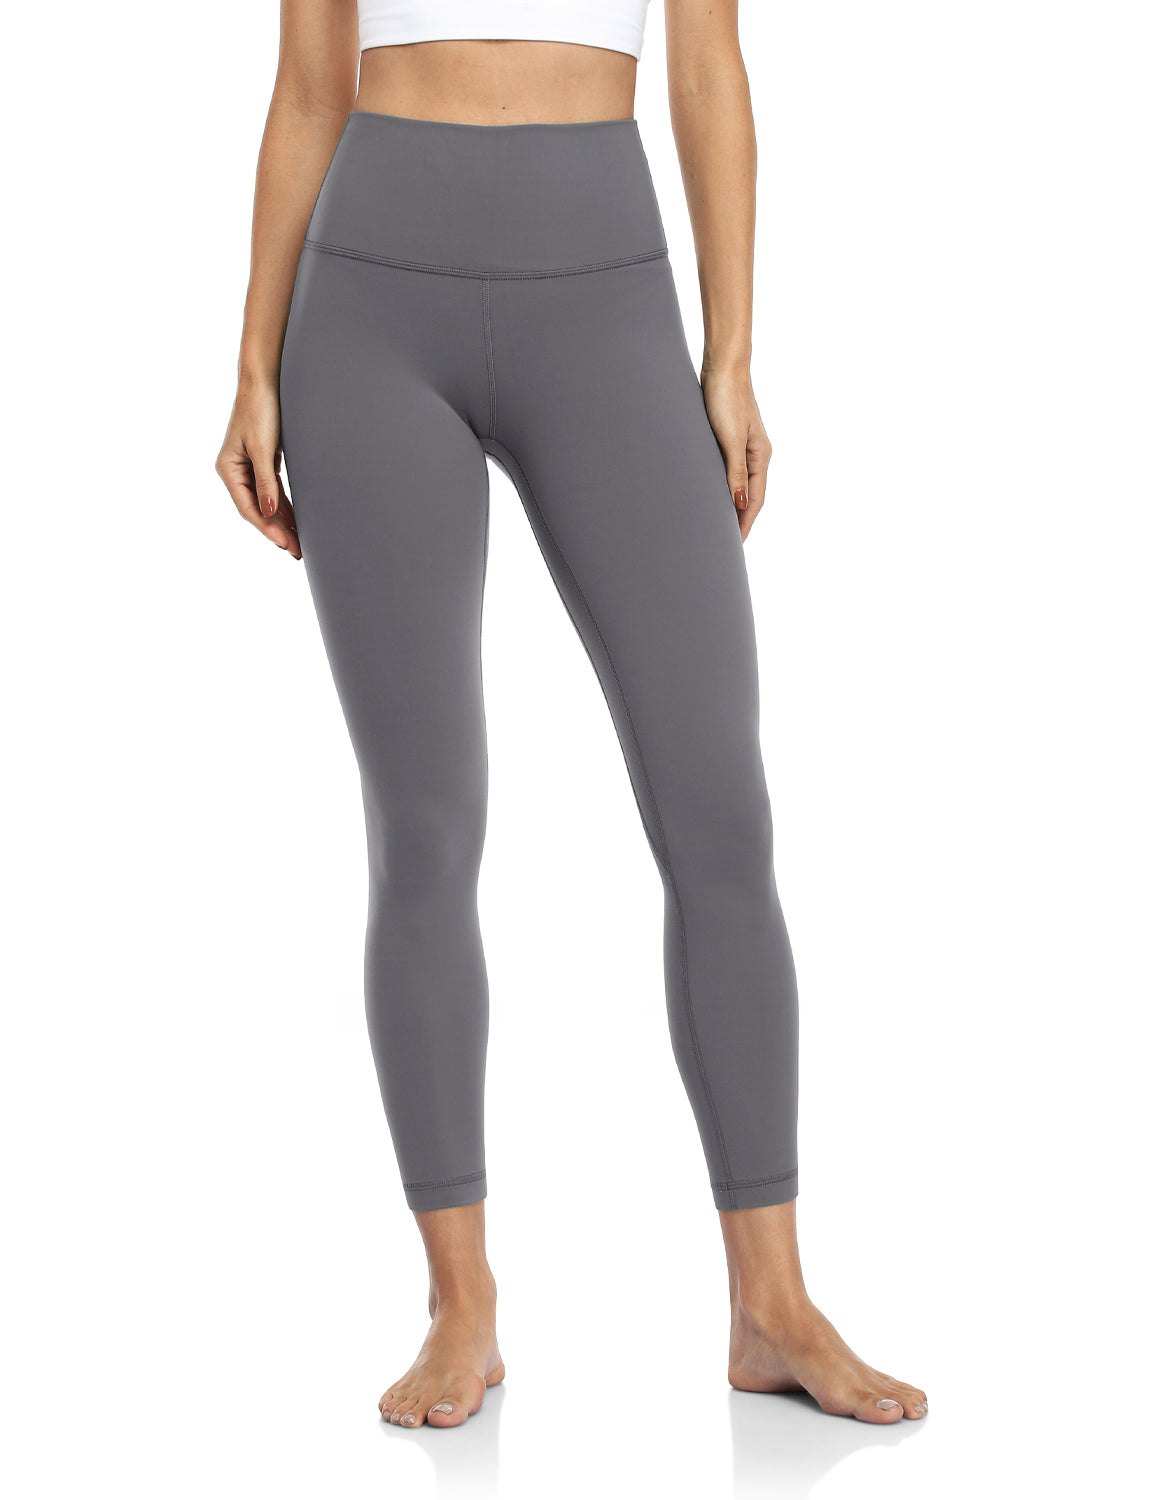 HeyNuts Essential 7/8 Leggings High Waisted Yoga Pants for Women, Soft  Workout Pants Compression Leggings with Inner Pockets Cassis_25'' S(4/6) :  Buy Online at Best Price in KSA - Souq is now